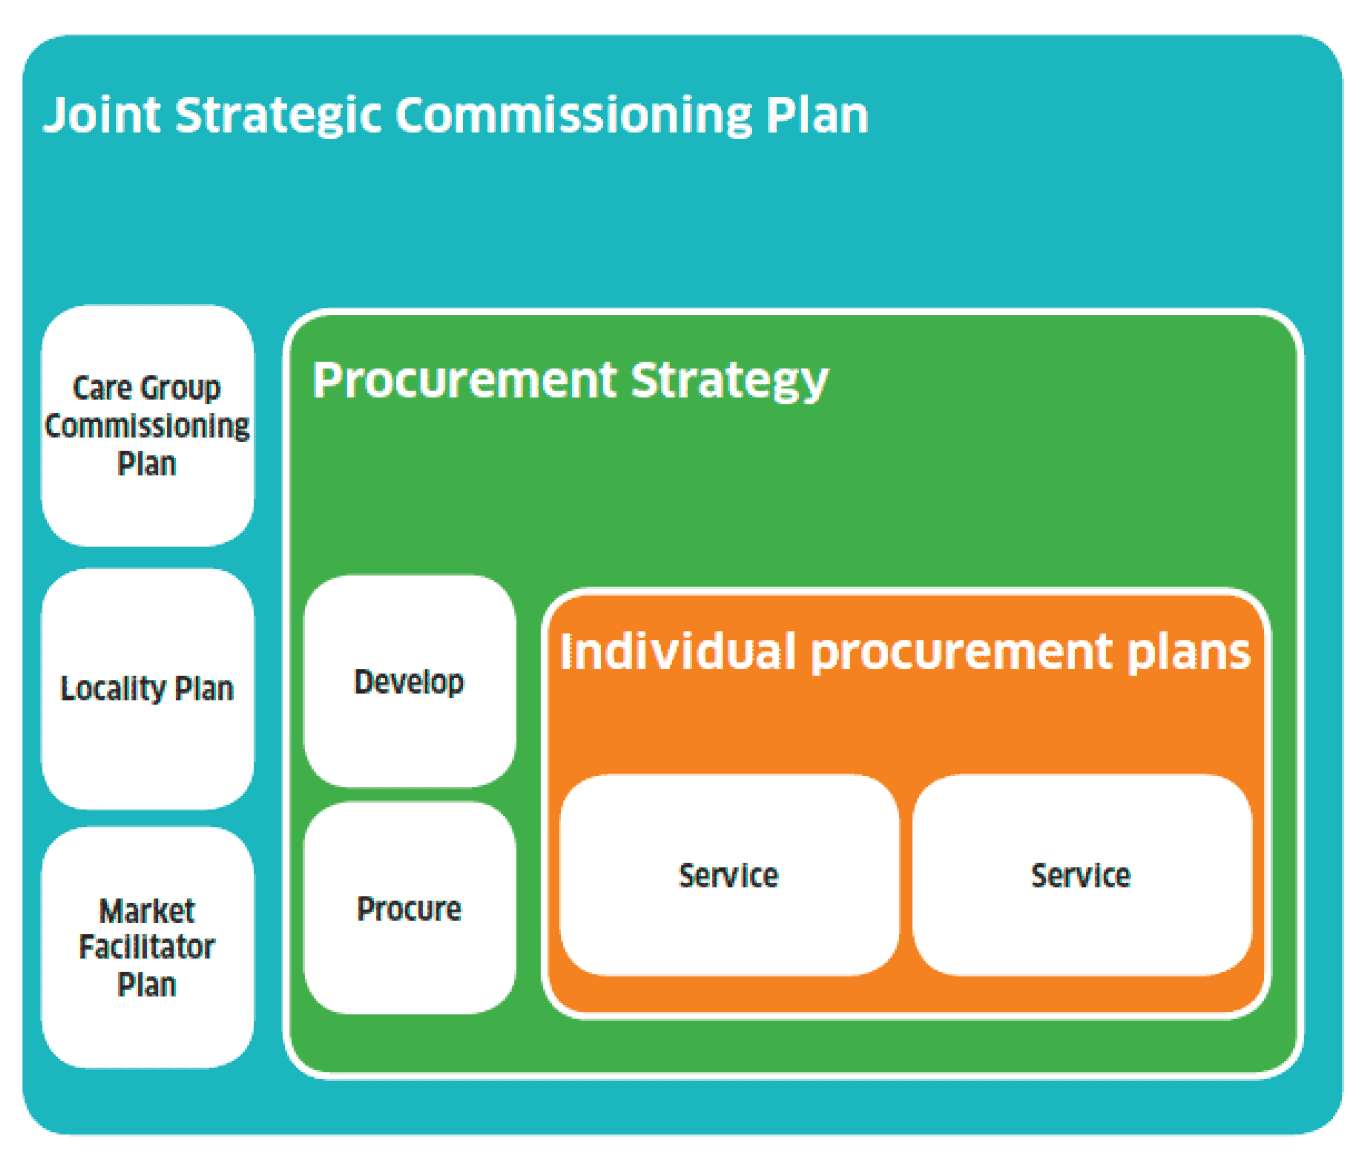 The image shows how the procurement strategy fits within the joint strategic commissioning plan and how individual procurement plans fit within the procurement strategy.